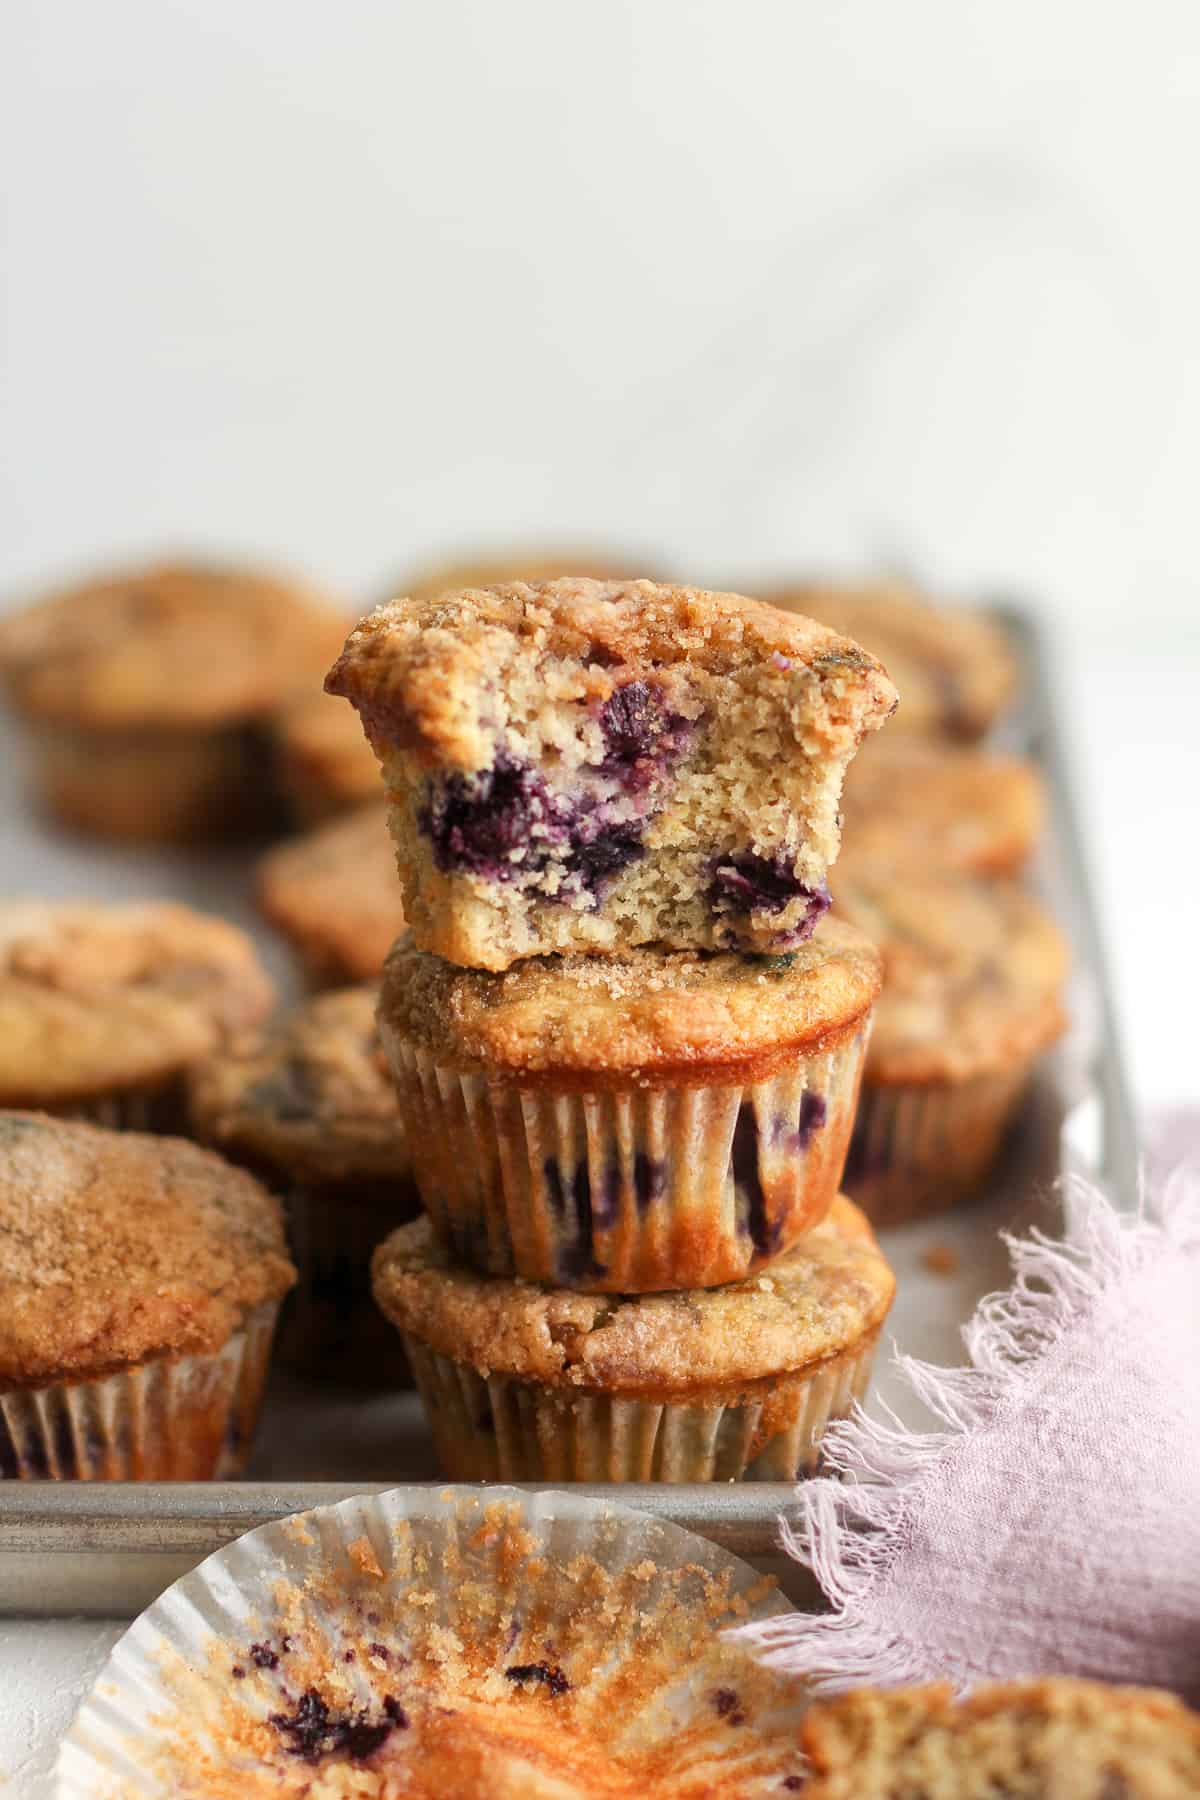 A stack of three blueberry streusel muffins on a tray of muffins.